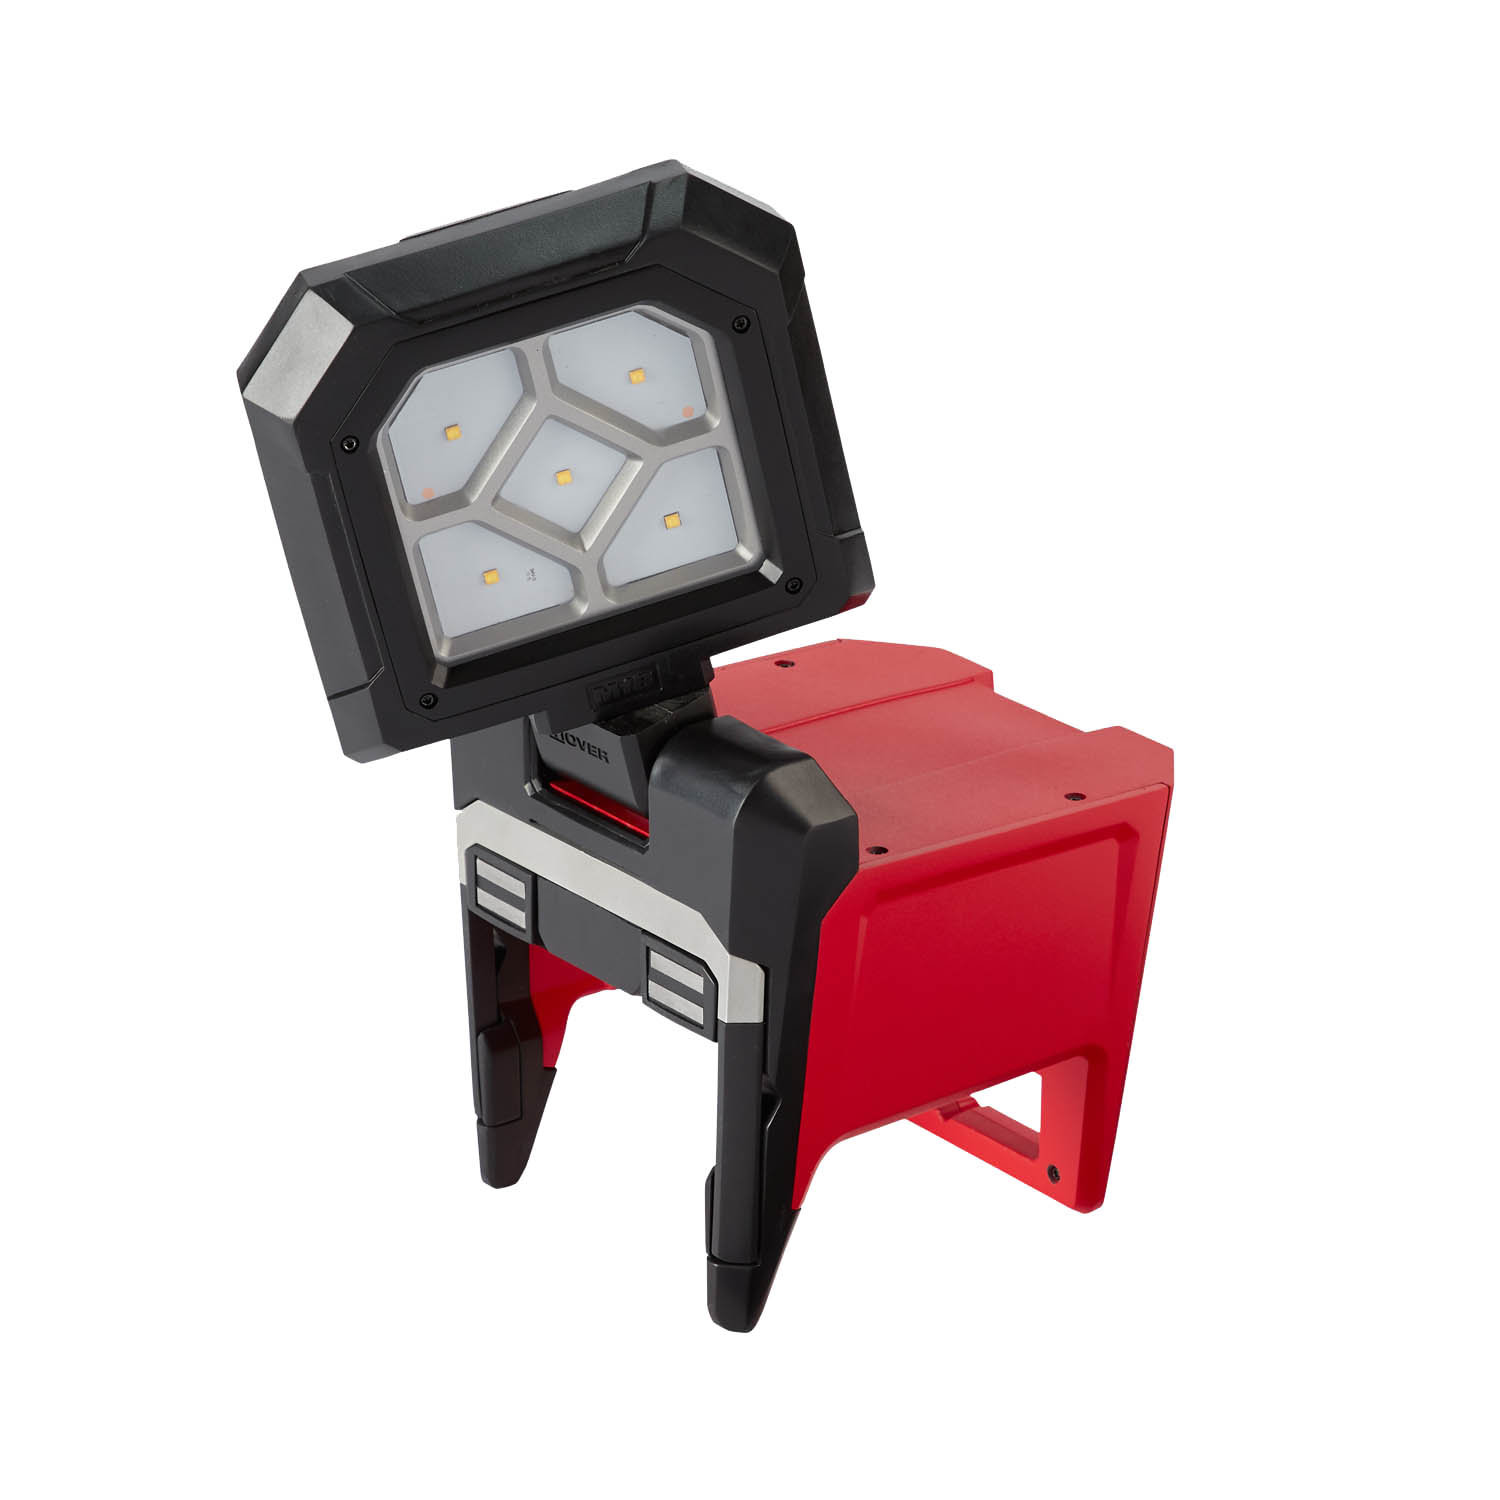 M18 ROVER MOUNTING FLOOD LIGHT